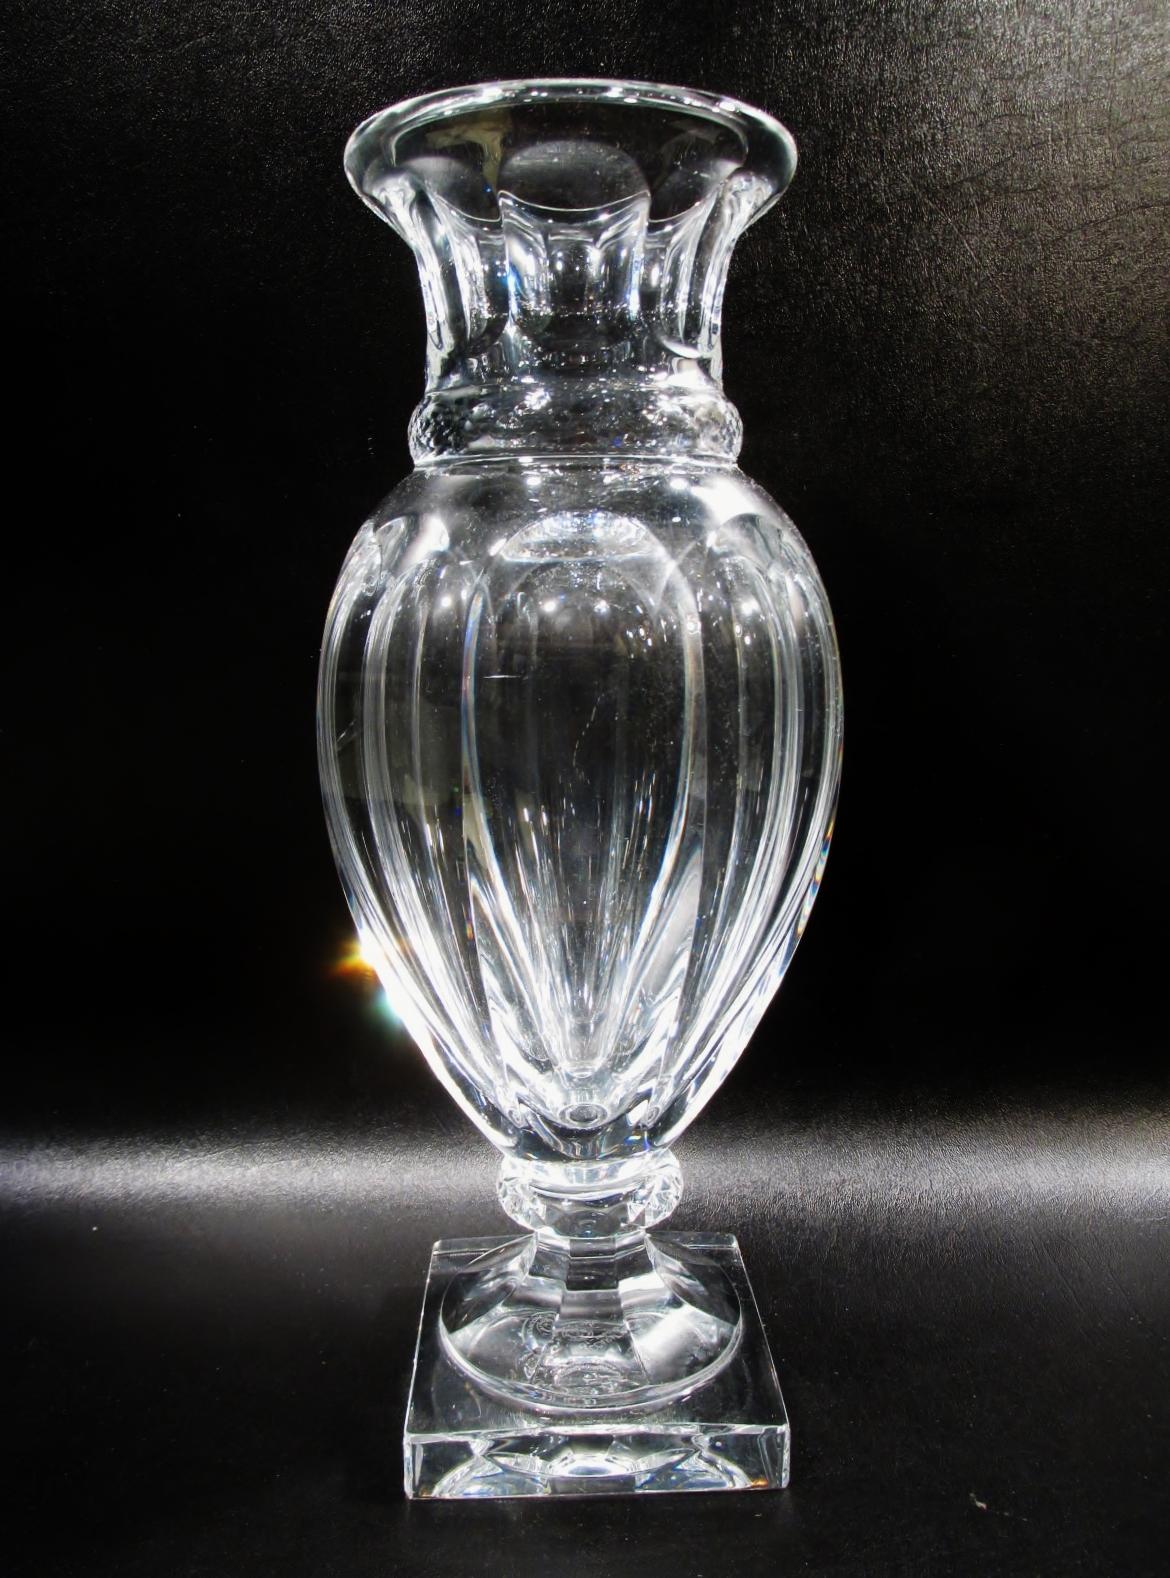 Wonderful large vintage 14.25” tall and 5.5” tall crystal paneled baluster vase. Today, Baccarat sells this piece as the Harcourt Amphora vase, when purchased it was known as the larger Marie-Louise flower vase with the large Baccarat anniversary